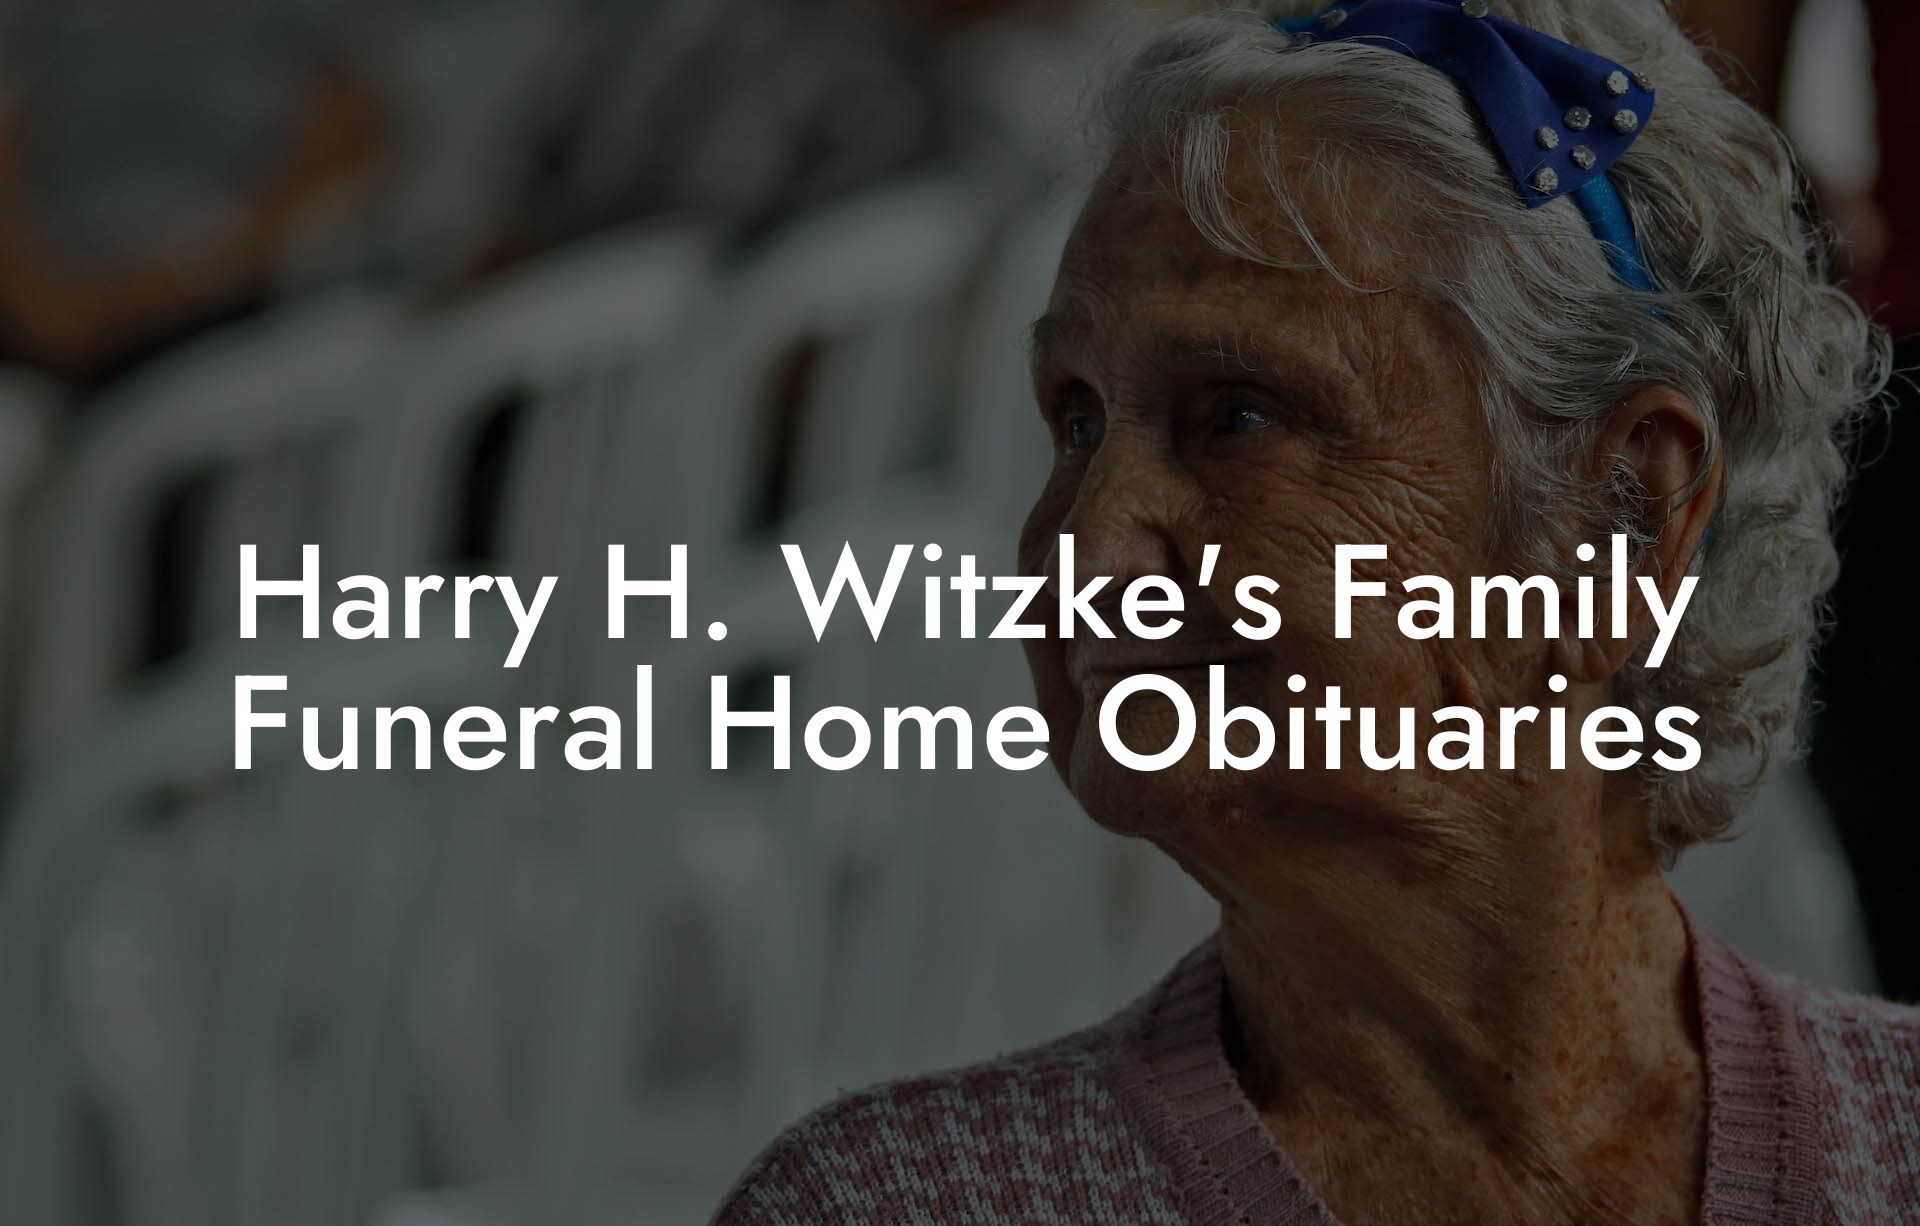 Harry H. Witzke's Family Funeral Home Obituaries